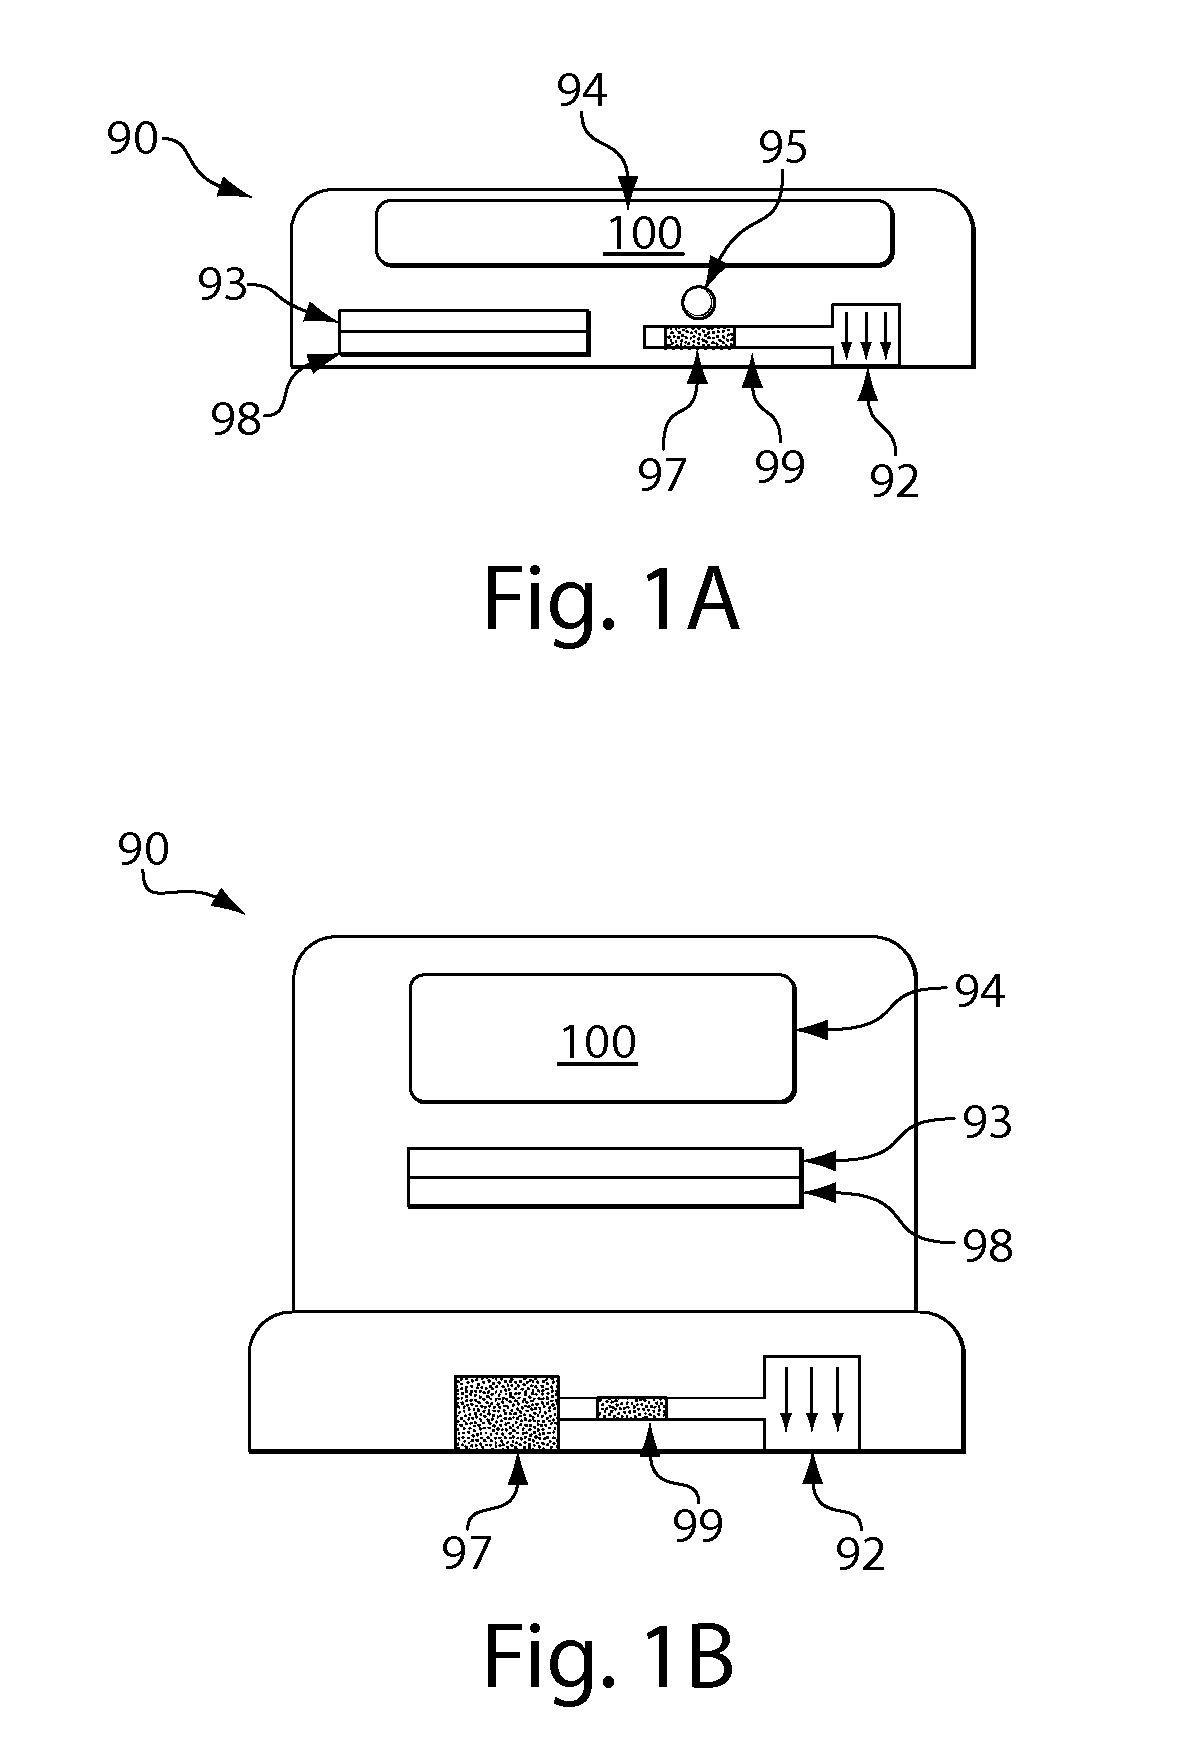 Sampling devices and methods involving relatively little pain